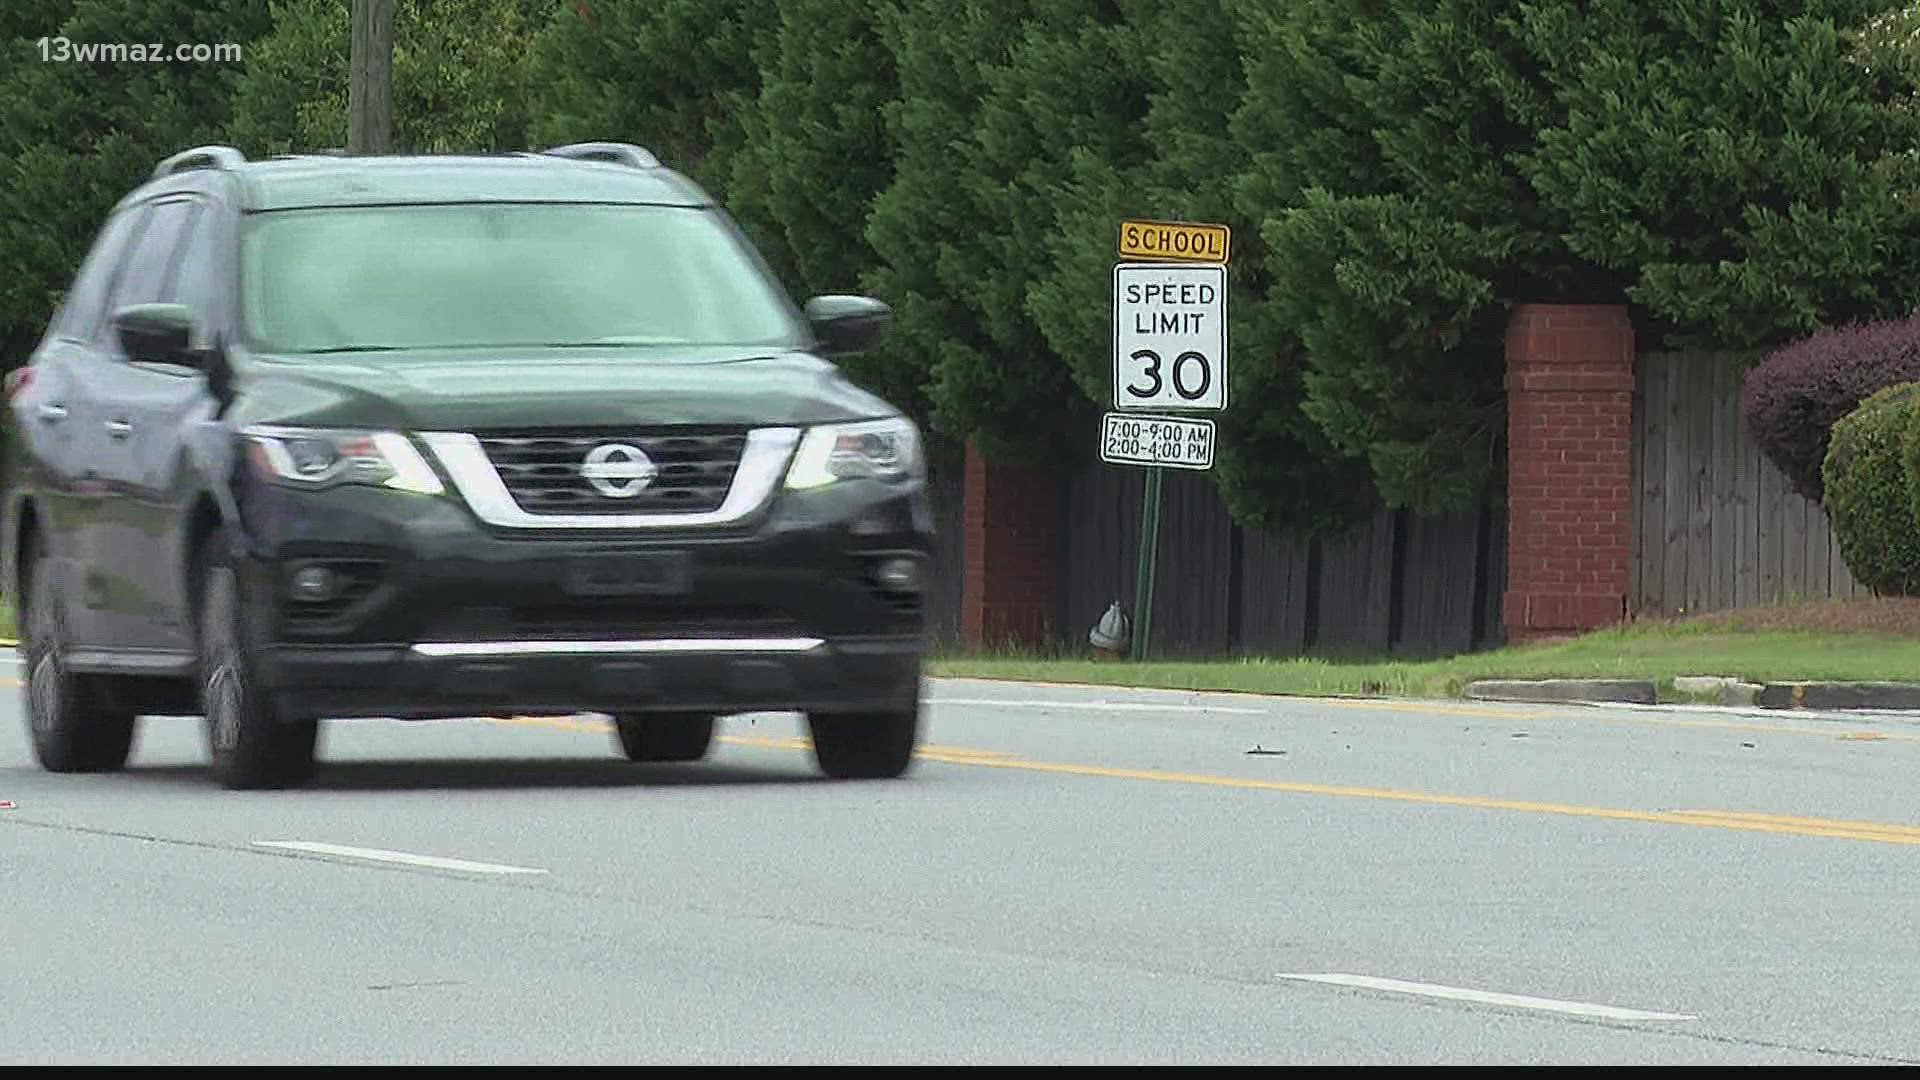 A new traffic study shows hundreds of drivers speeding through school zones in Warner Robins.
City council members say the results show a need for speed cameras.